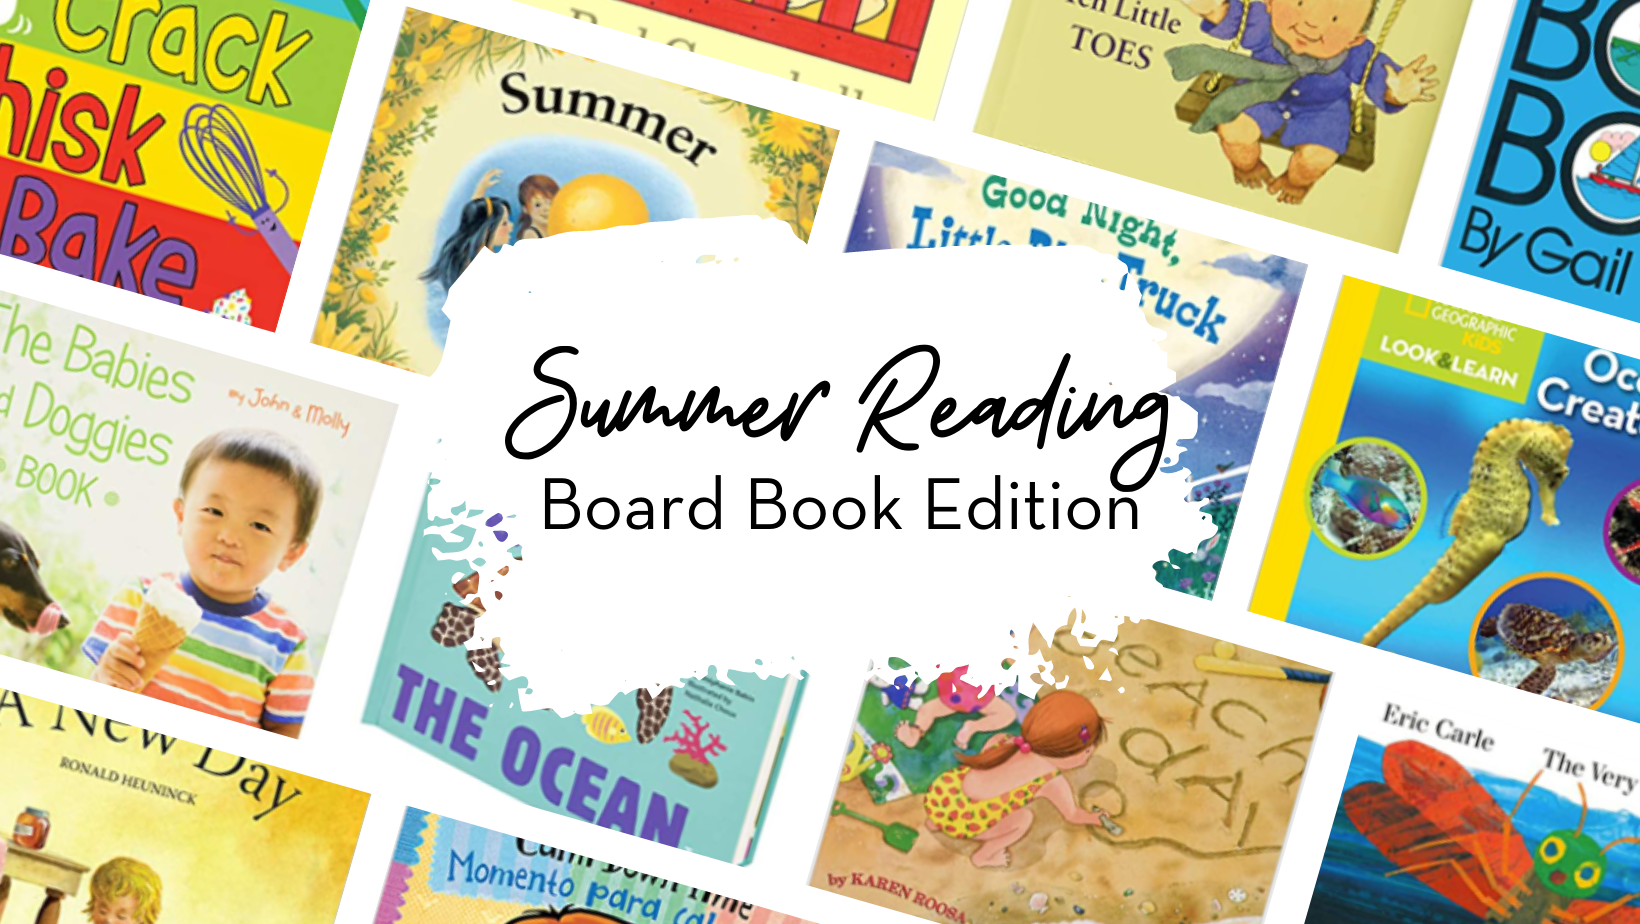 Summer Reading Board Books for Toddlers